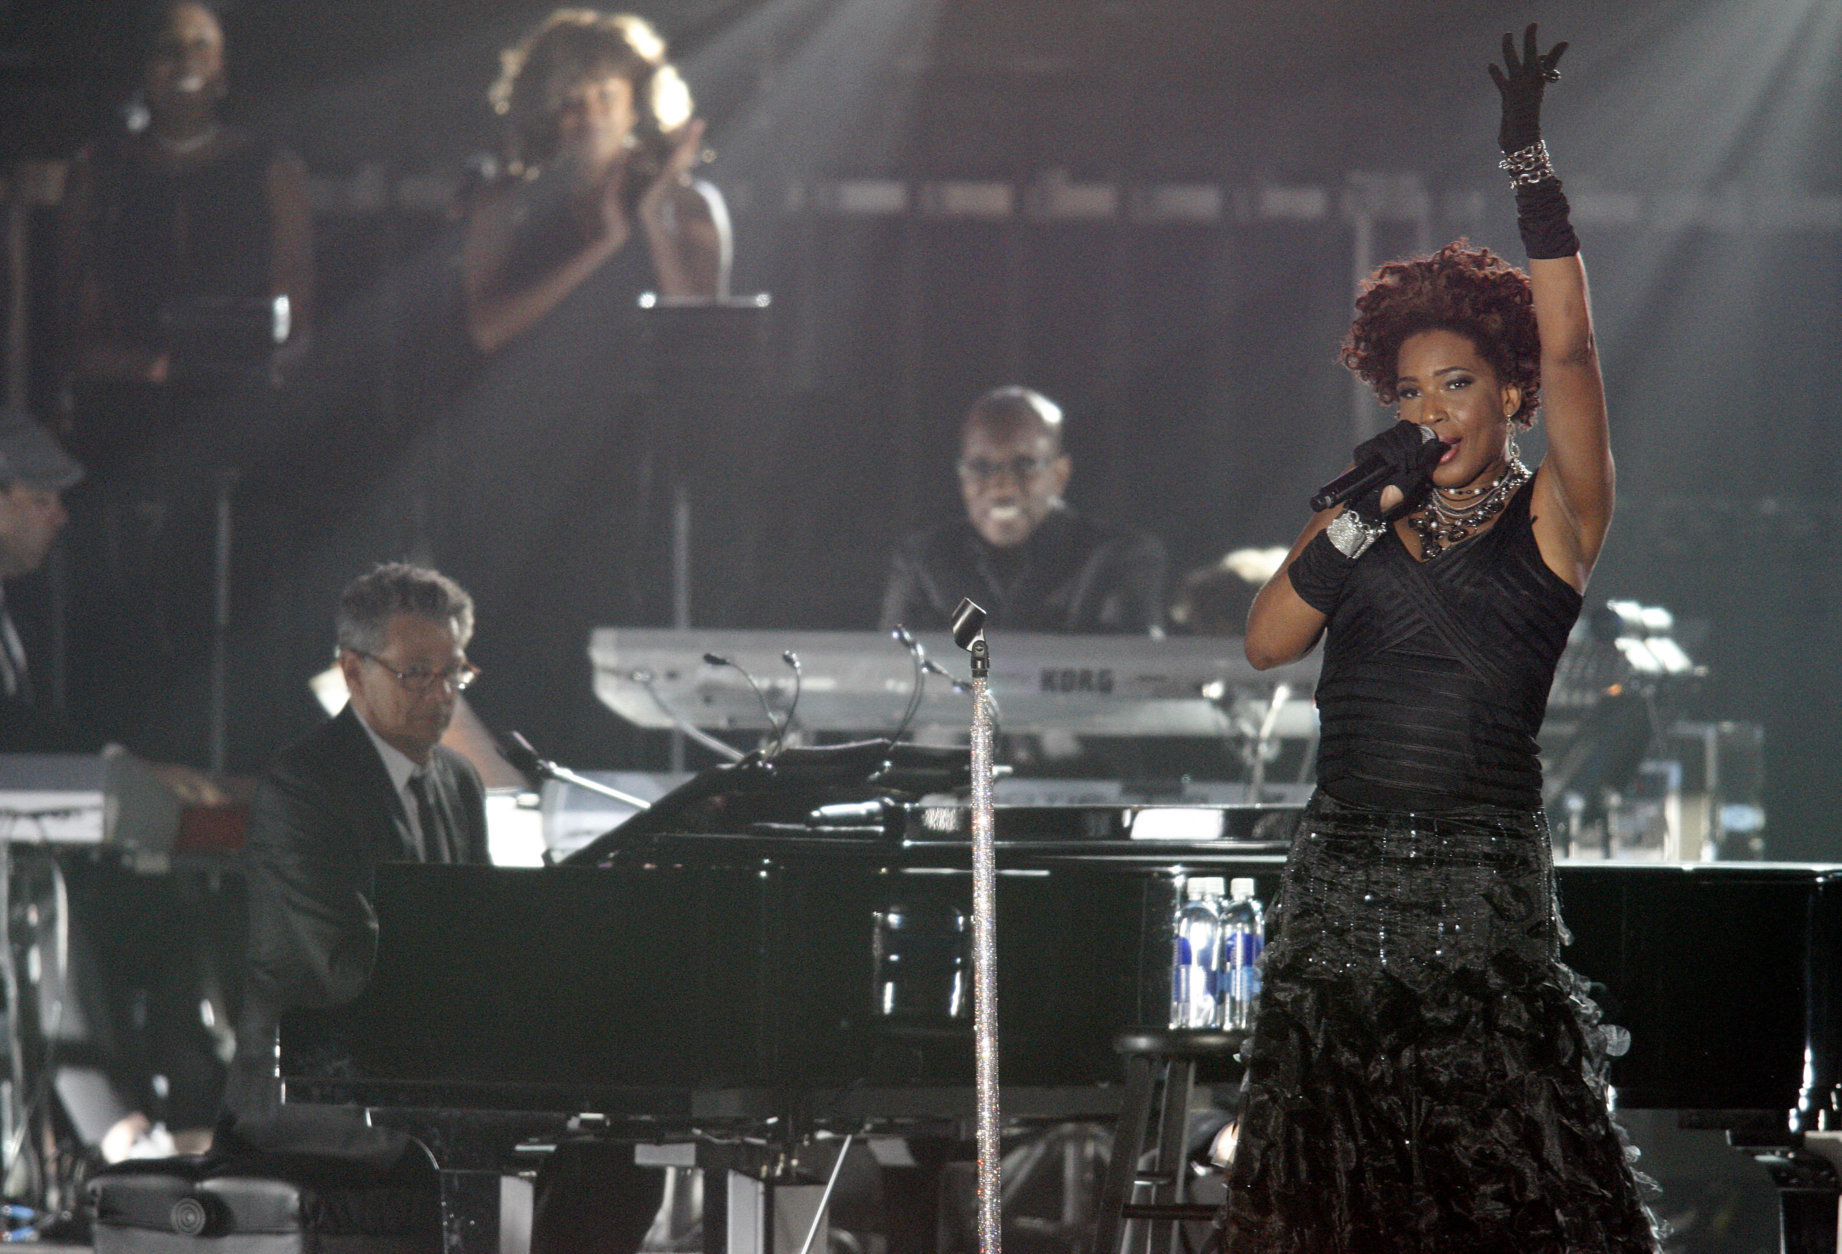 Macy Gray, right, performs during the Andre Agassi Foundation for Education's Grand Slam for Children benefit concert at Wynn Las Vegas hotel and casino, Saturday, Sept. 26, 2009 in Las Vegas. (AP Photo/Isaac Brekken)